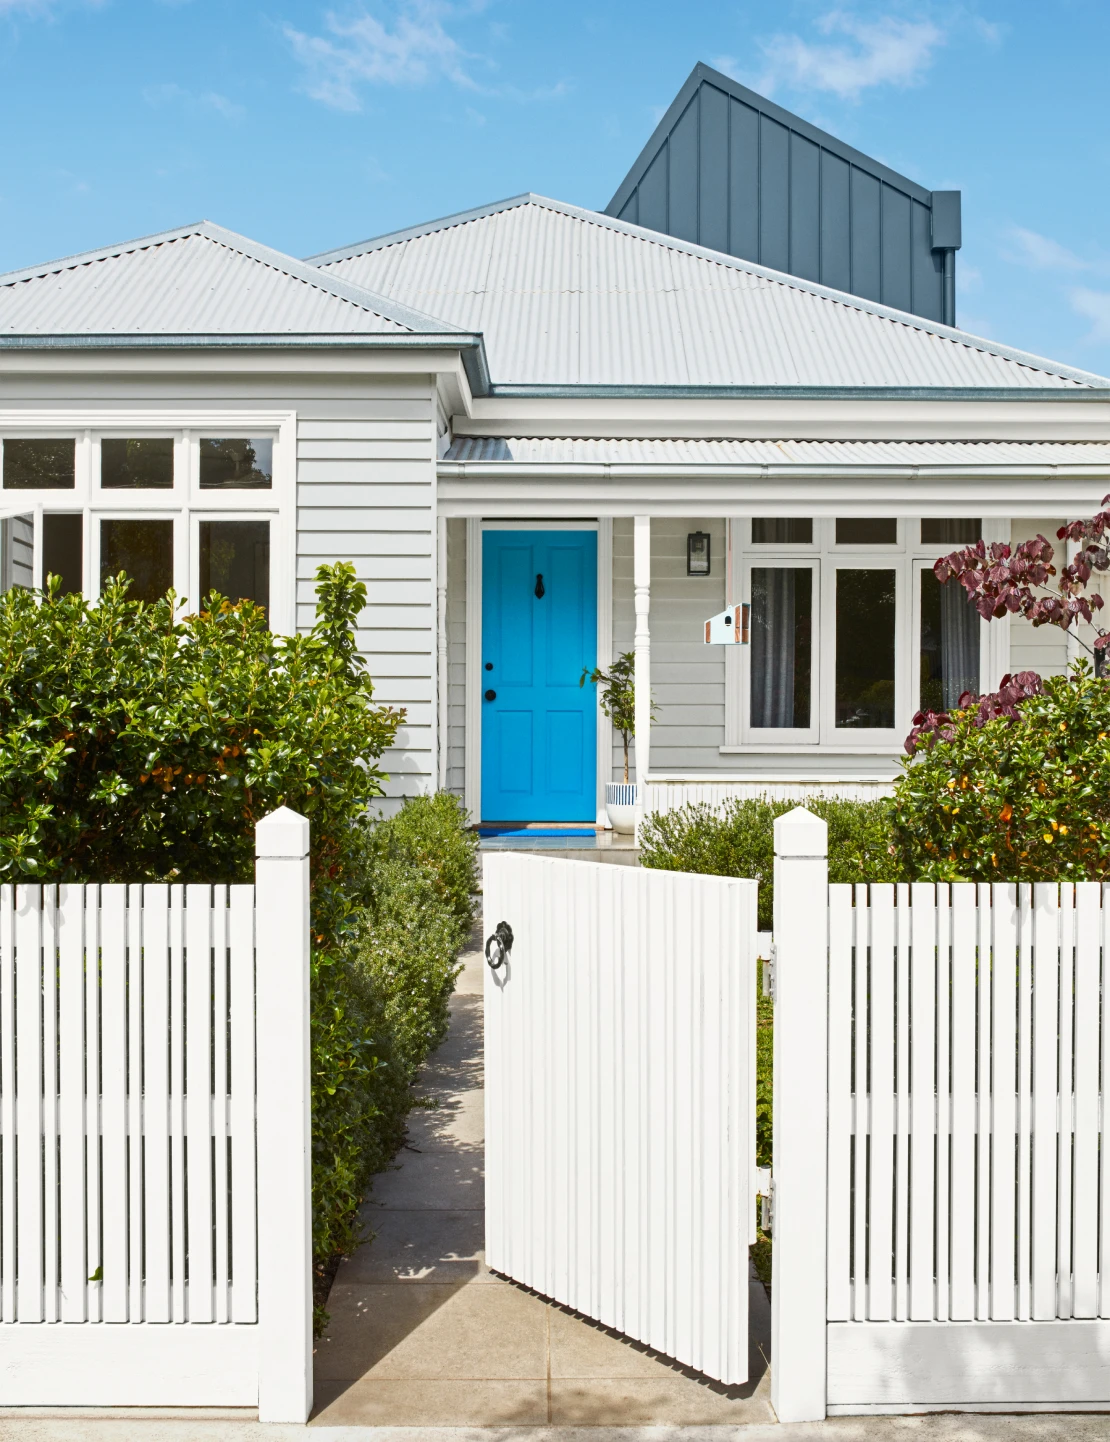 Weatherboard grey house with blue door, white picket fence